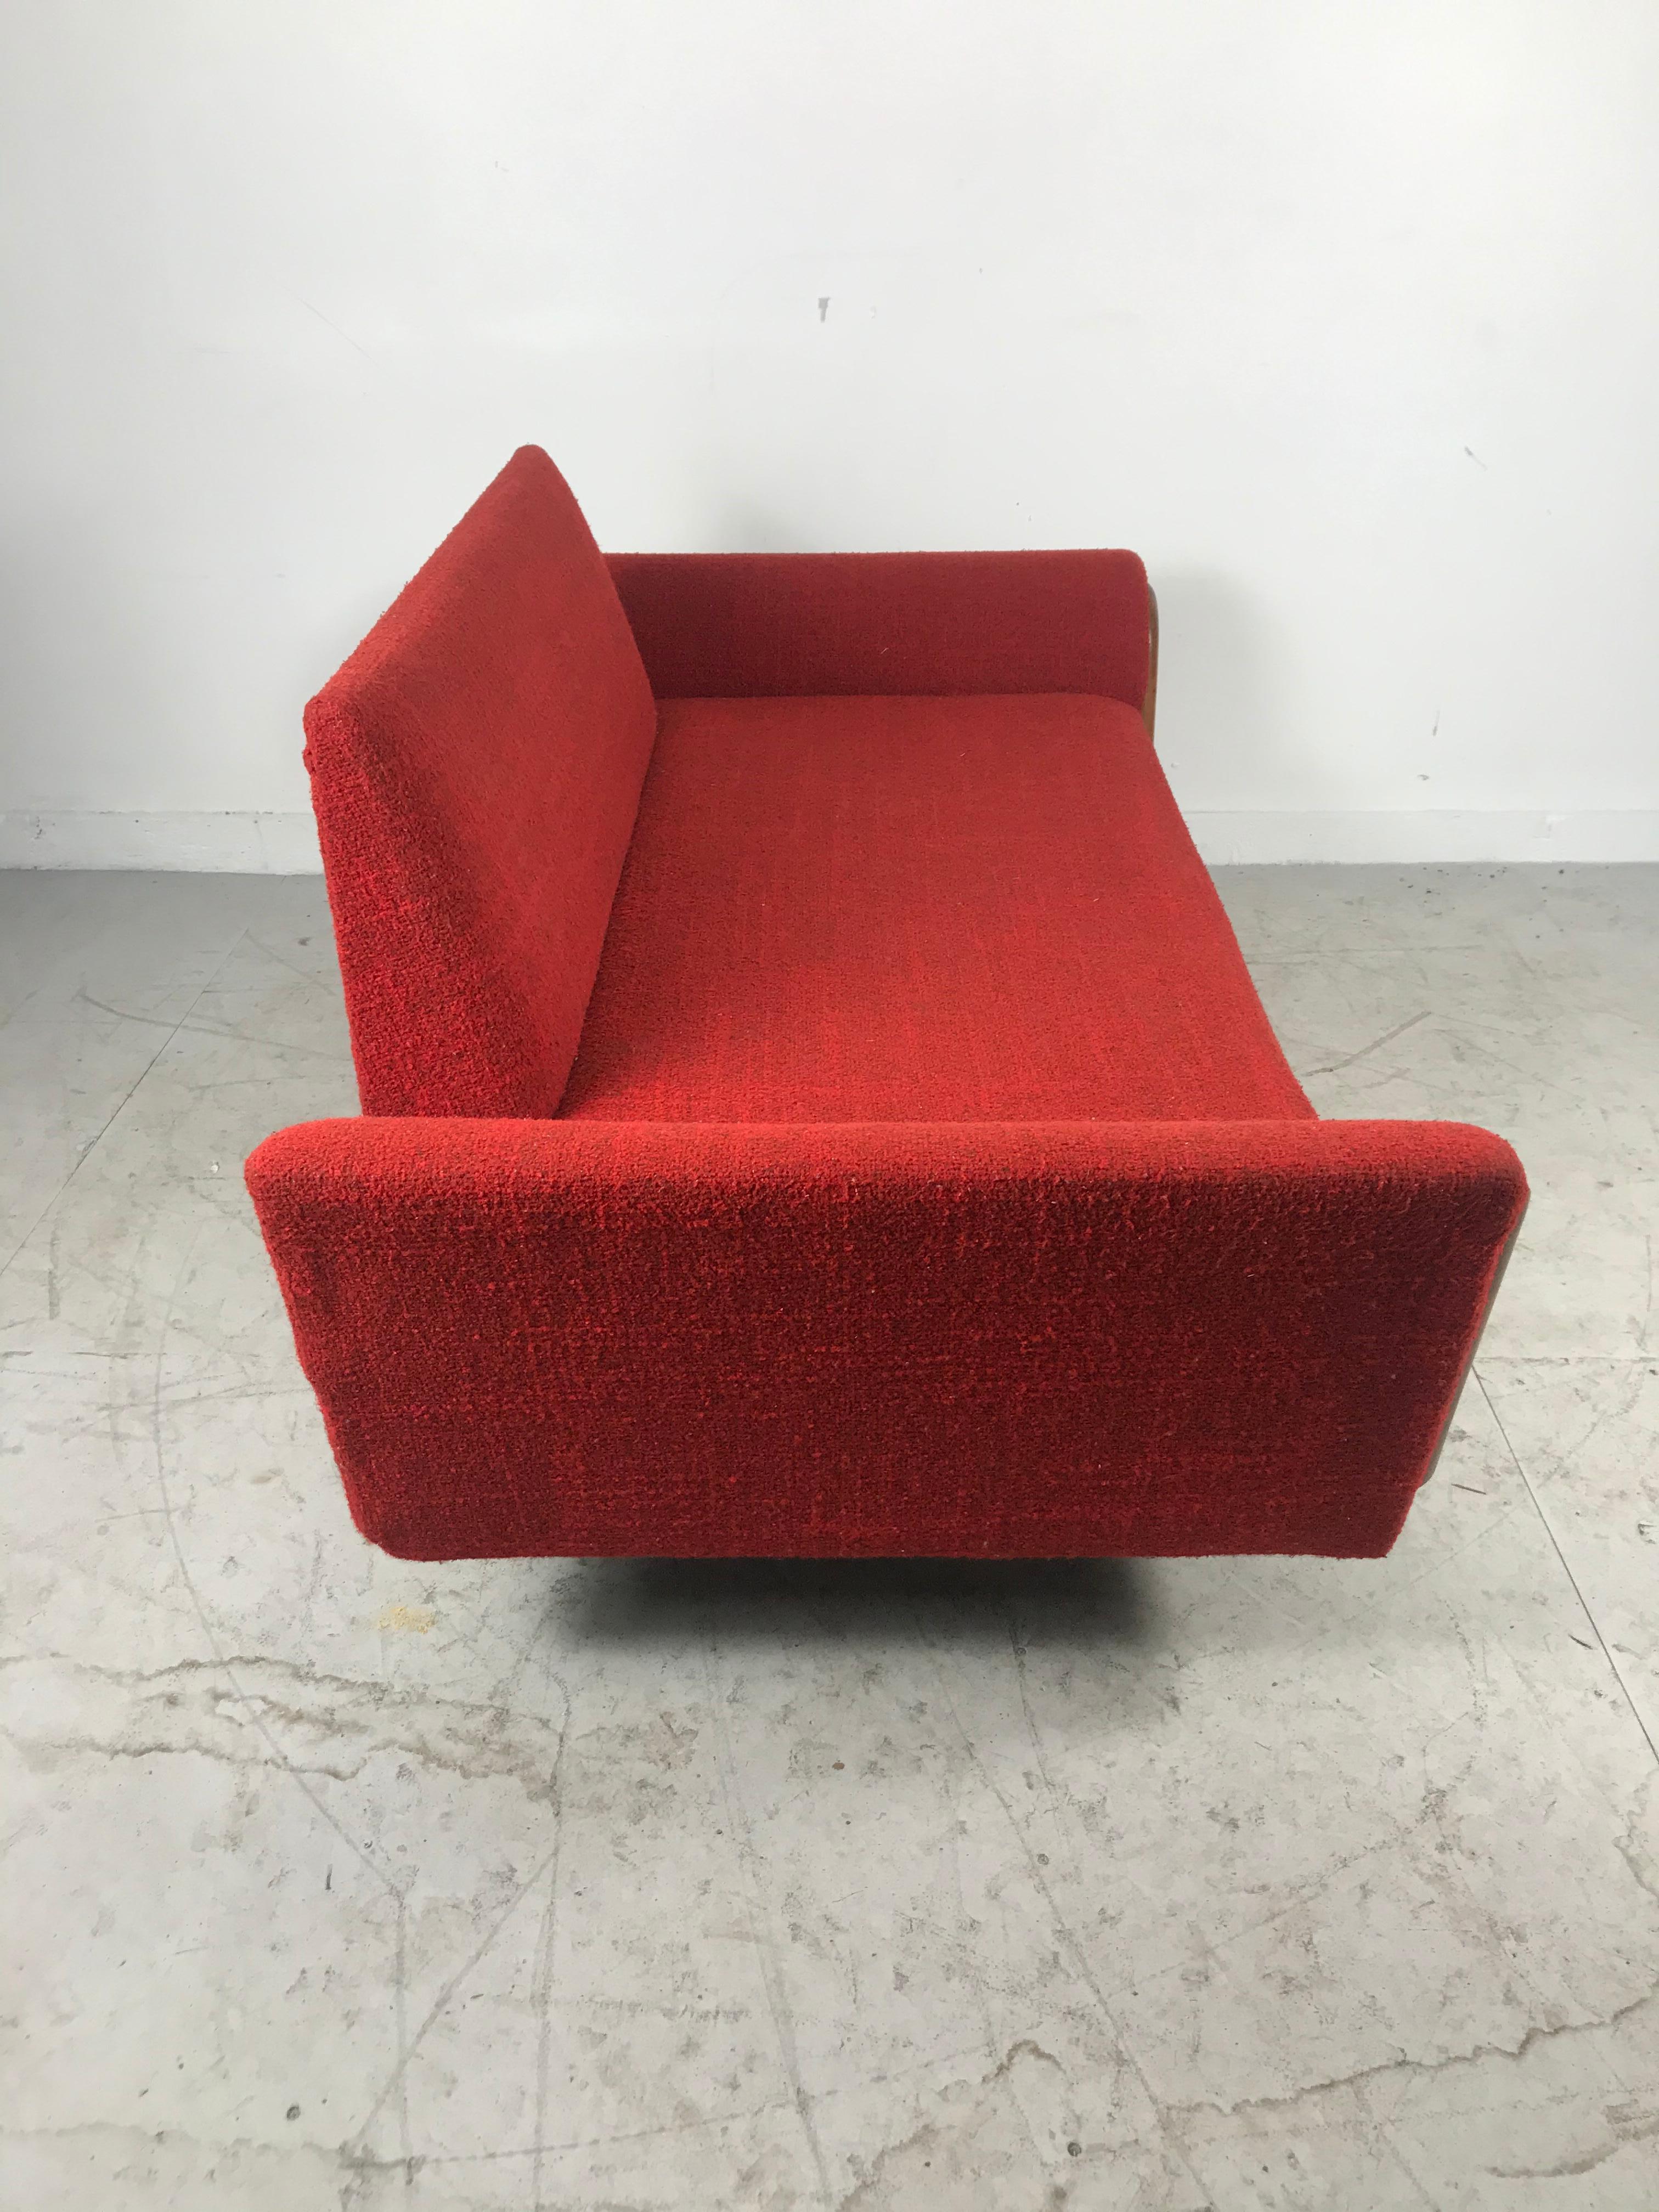 Classic modernist 2-seat sofa (loveseat), sculpted walnut detailing, original fire engine red wool upholstery in nice original condition. Attributed to Adrian Pearsall. Amazing design, Classic Mid-Century Modern.